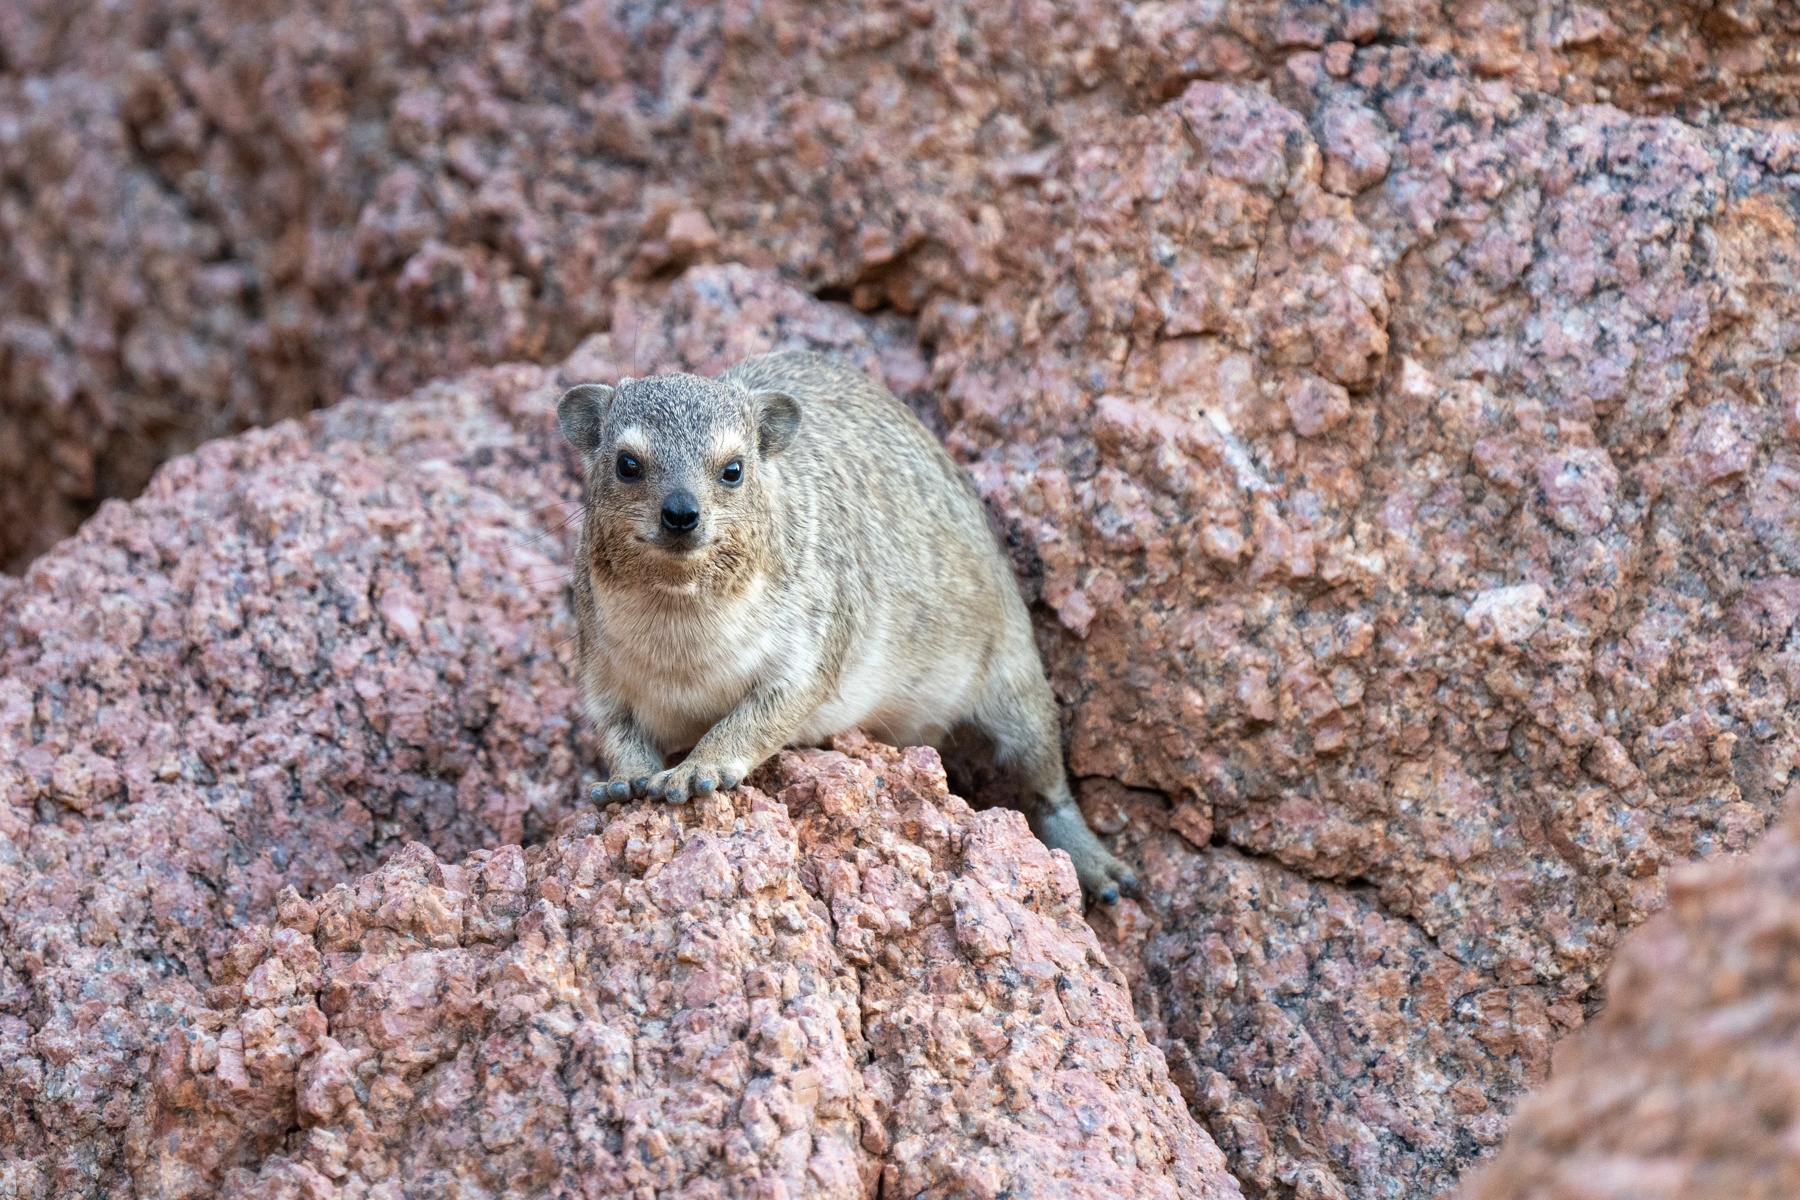 Adorable Rock Hyraxes are universally loved by the guests of our Namibia photography tours